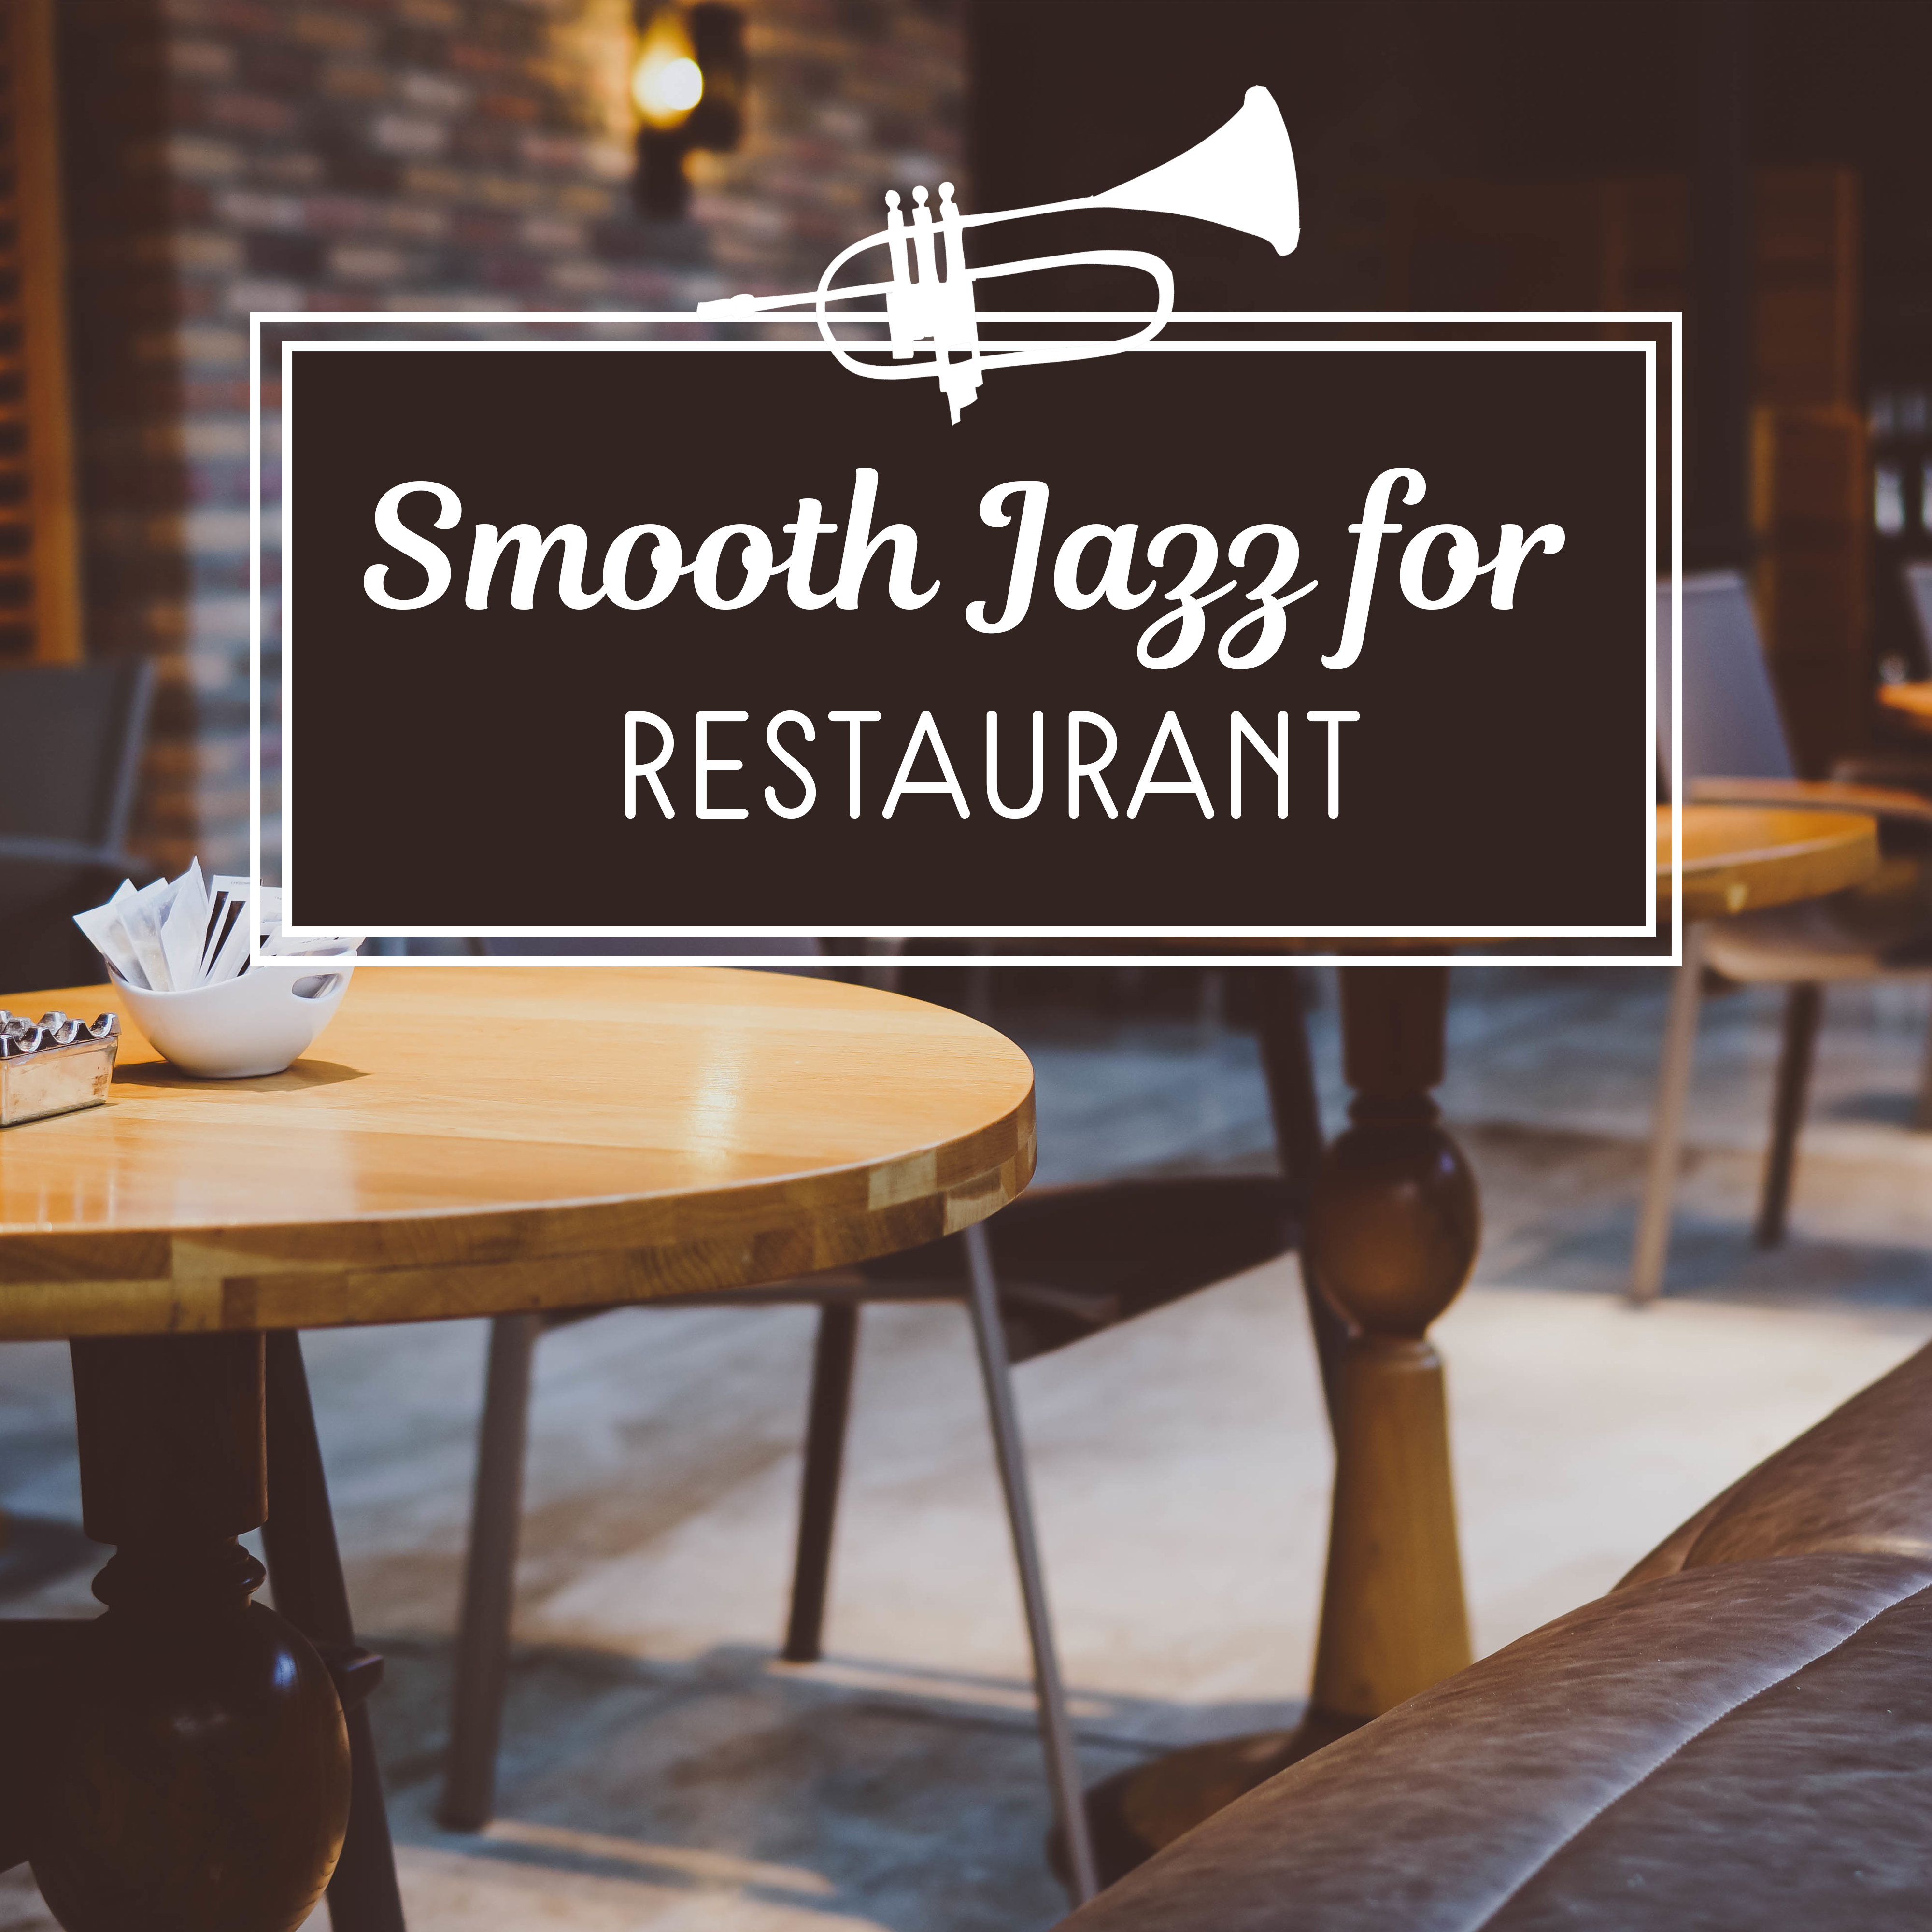 Smooth Jazz for Restaurant  Calming Jazz, Family Meeting, Coffee Restaurant, Jazz for Relaxation